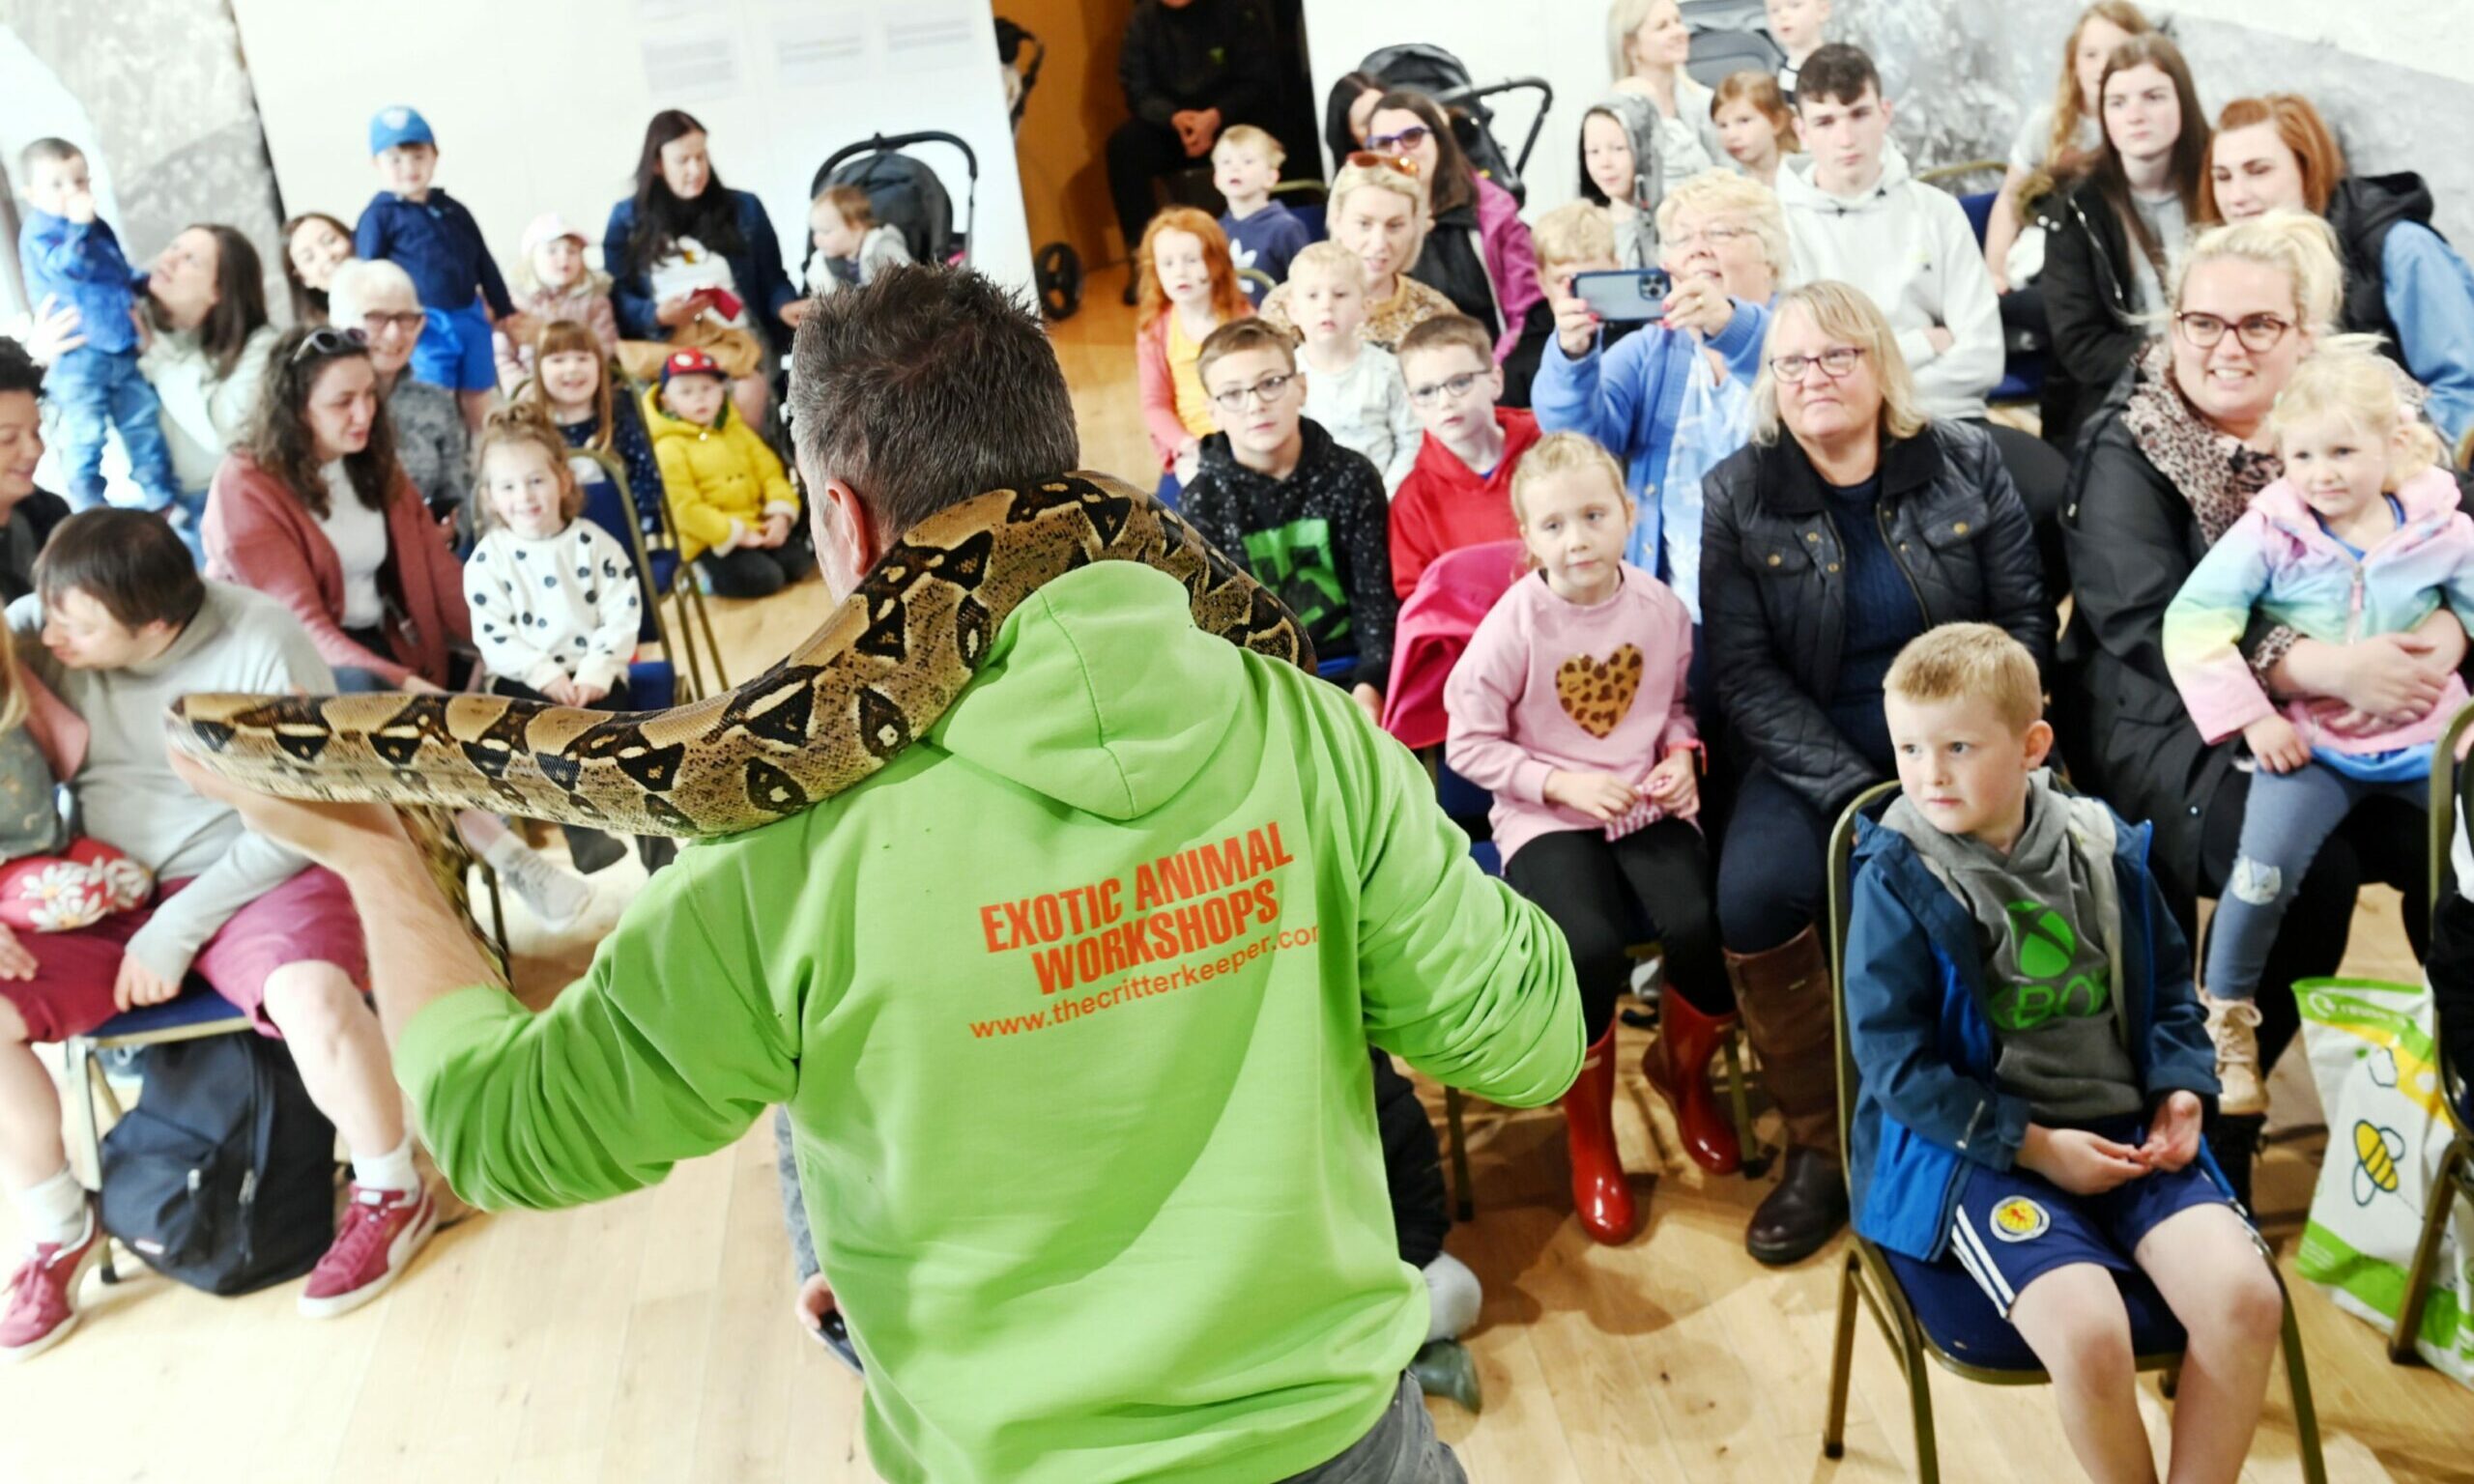 The Wild About Aden event featured talks on exotic animals and other fun activities for families. All pictures by Kami Thomson/ DC Thomson.